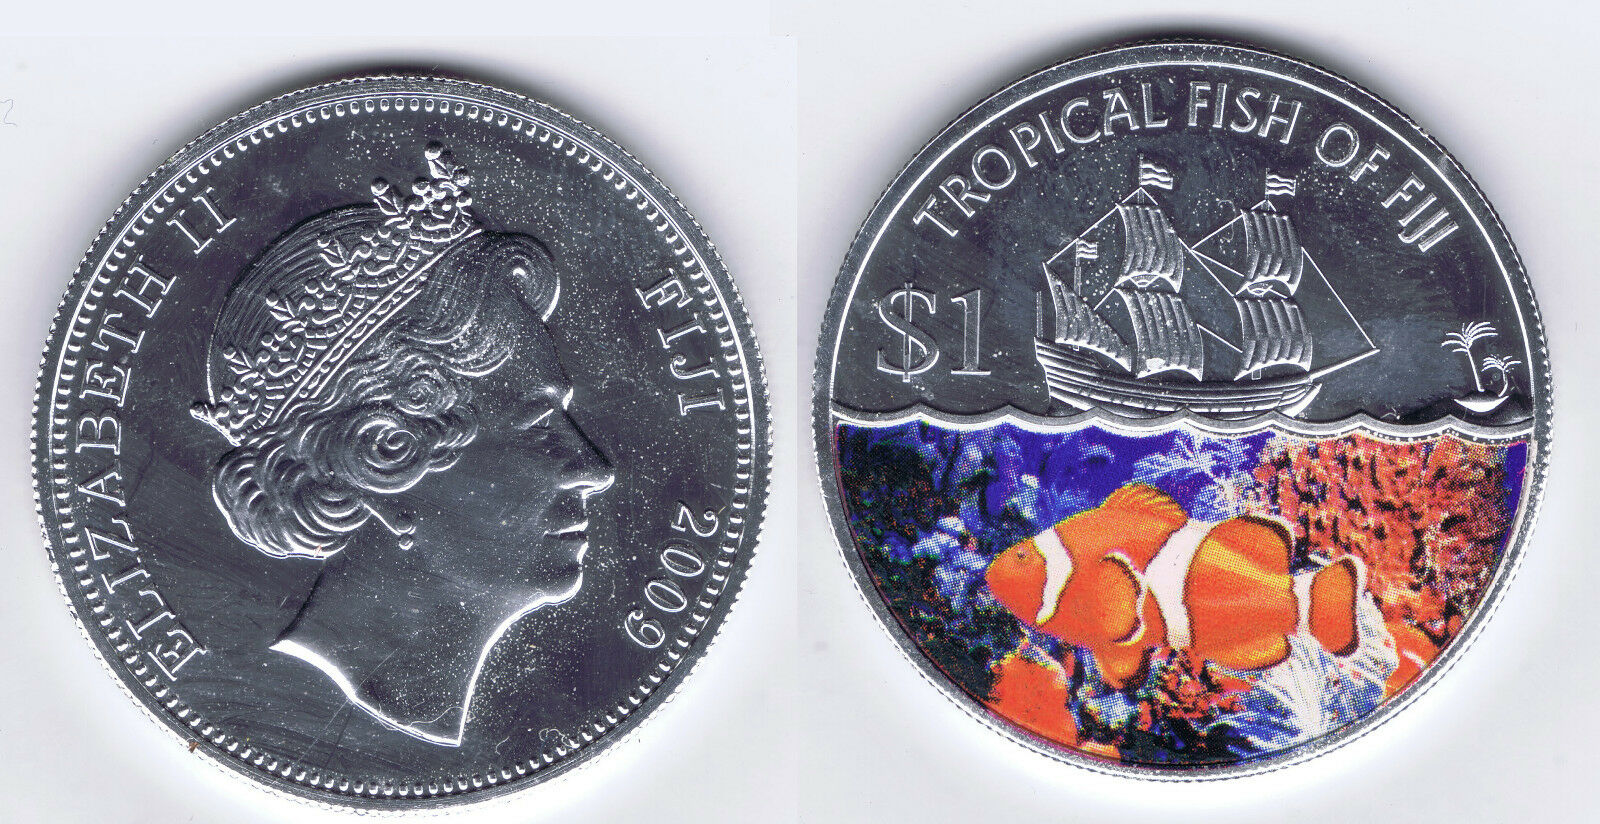 FIJI PROOF LIKE CLOWN FISH 2009 CU-NI with SILVER PLATE COLOR COIN ENCAPSULATED